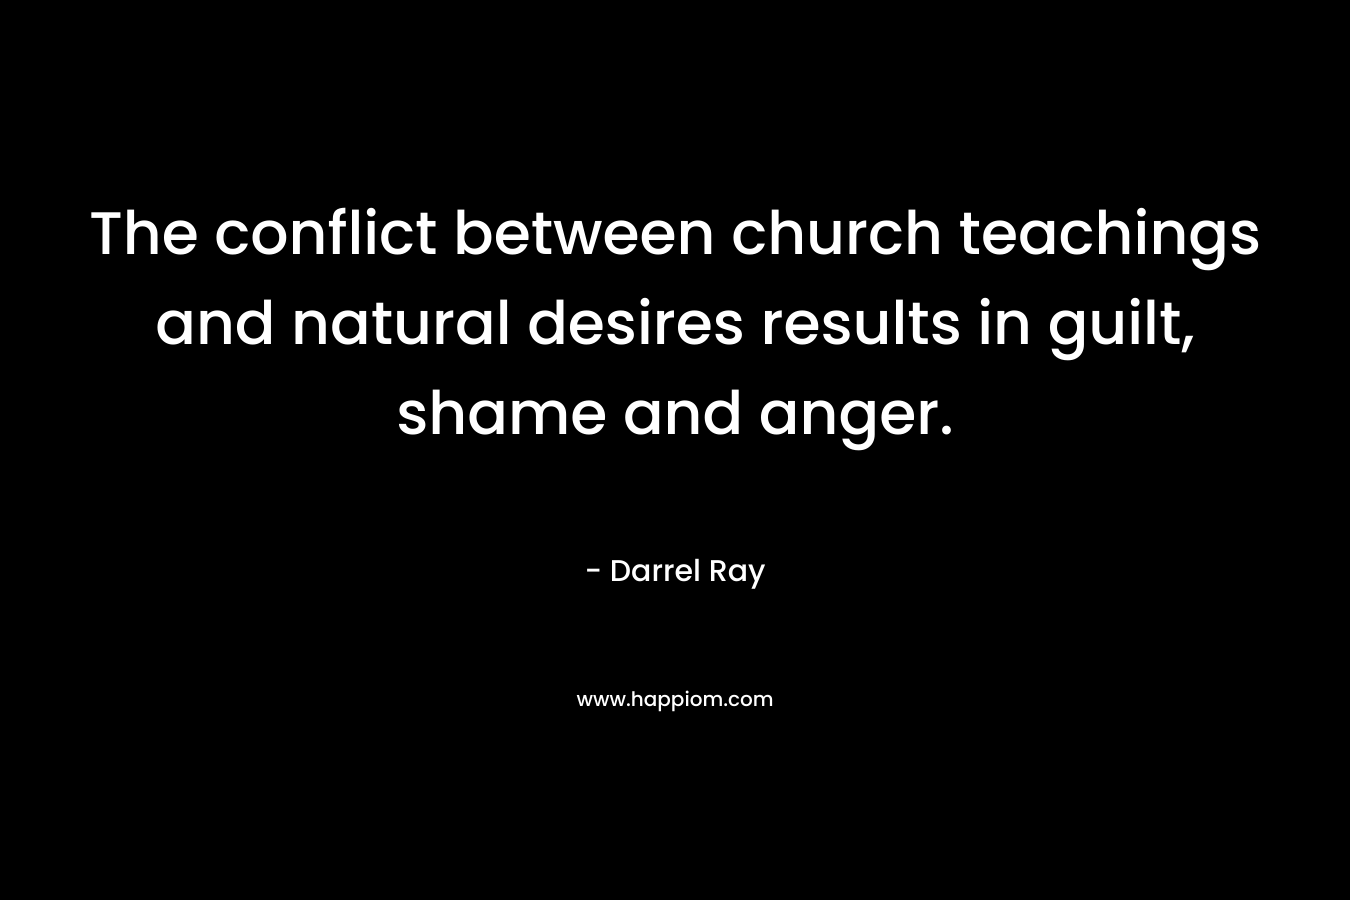 The conflict between church teachings and natural desires results in guilt, shame and anger. – Darrel Ray